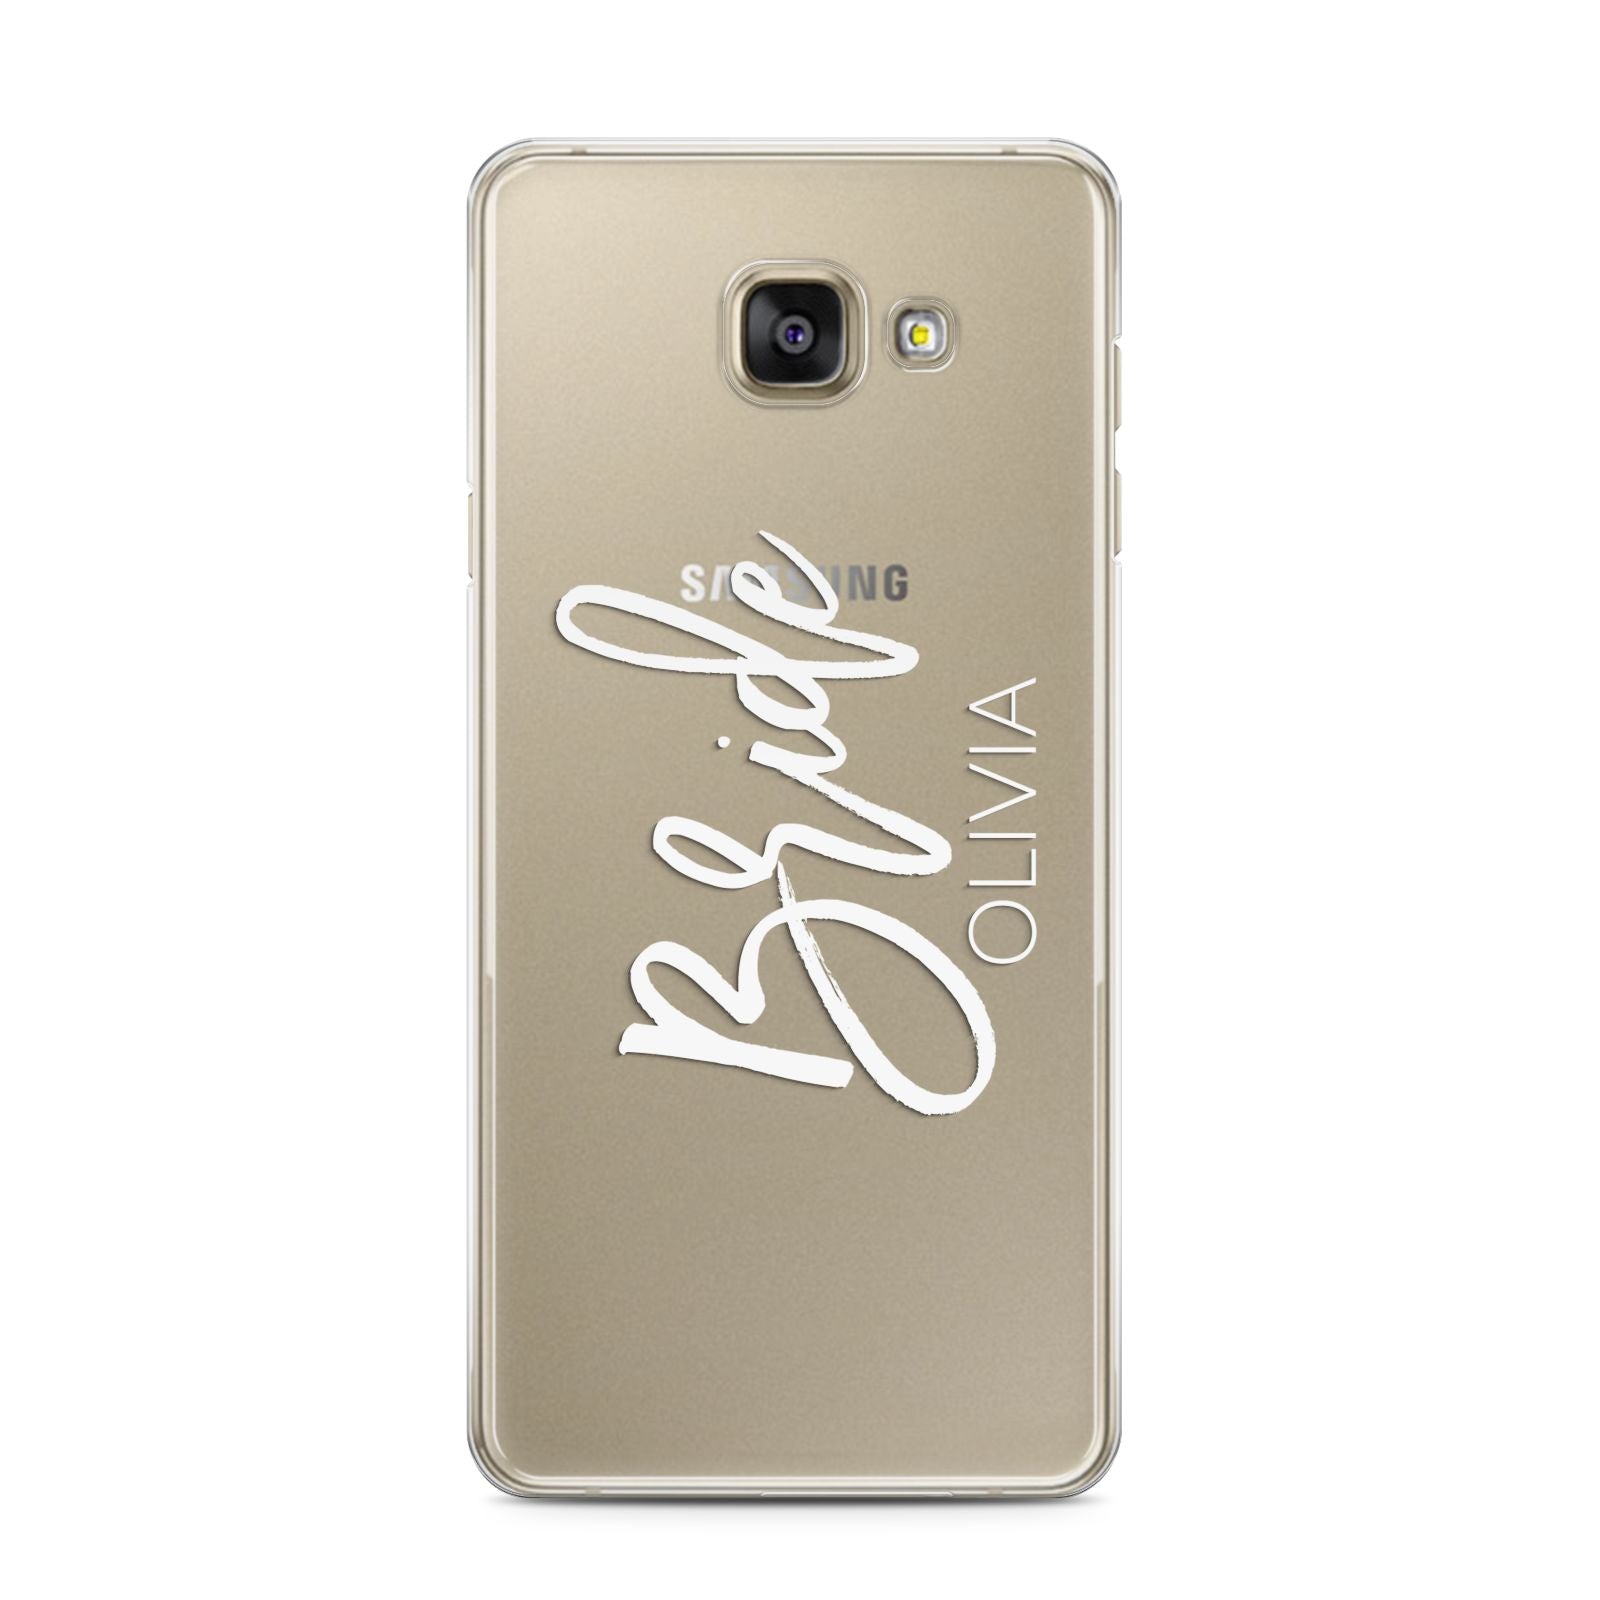 Personalised Bride Samsung Galaxy A3 2016 Case on gold phone